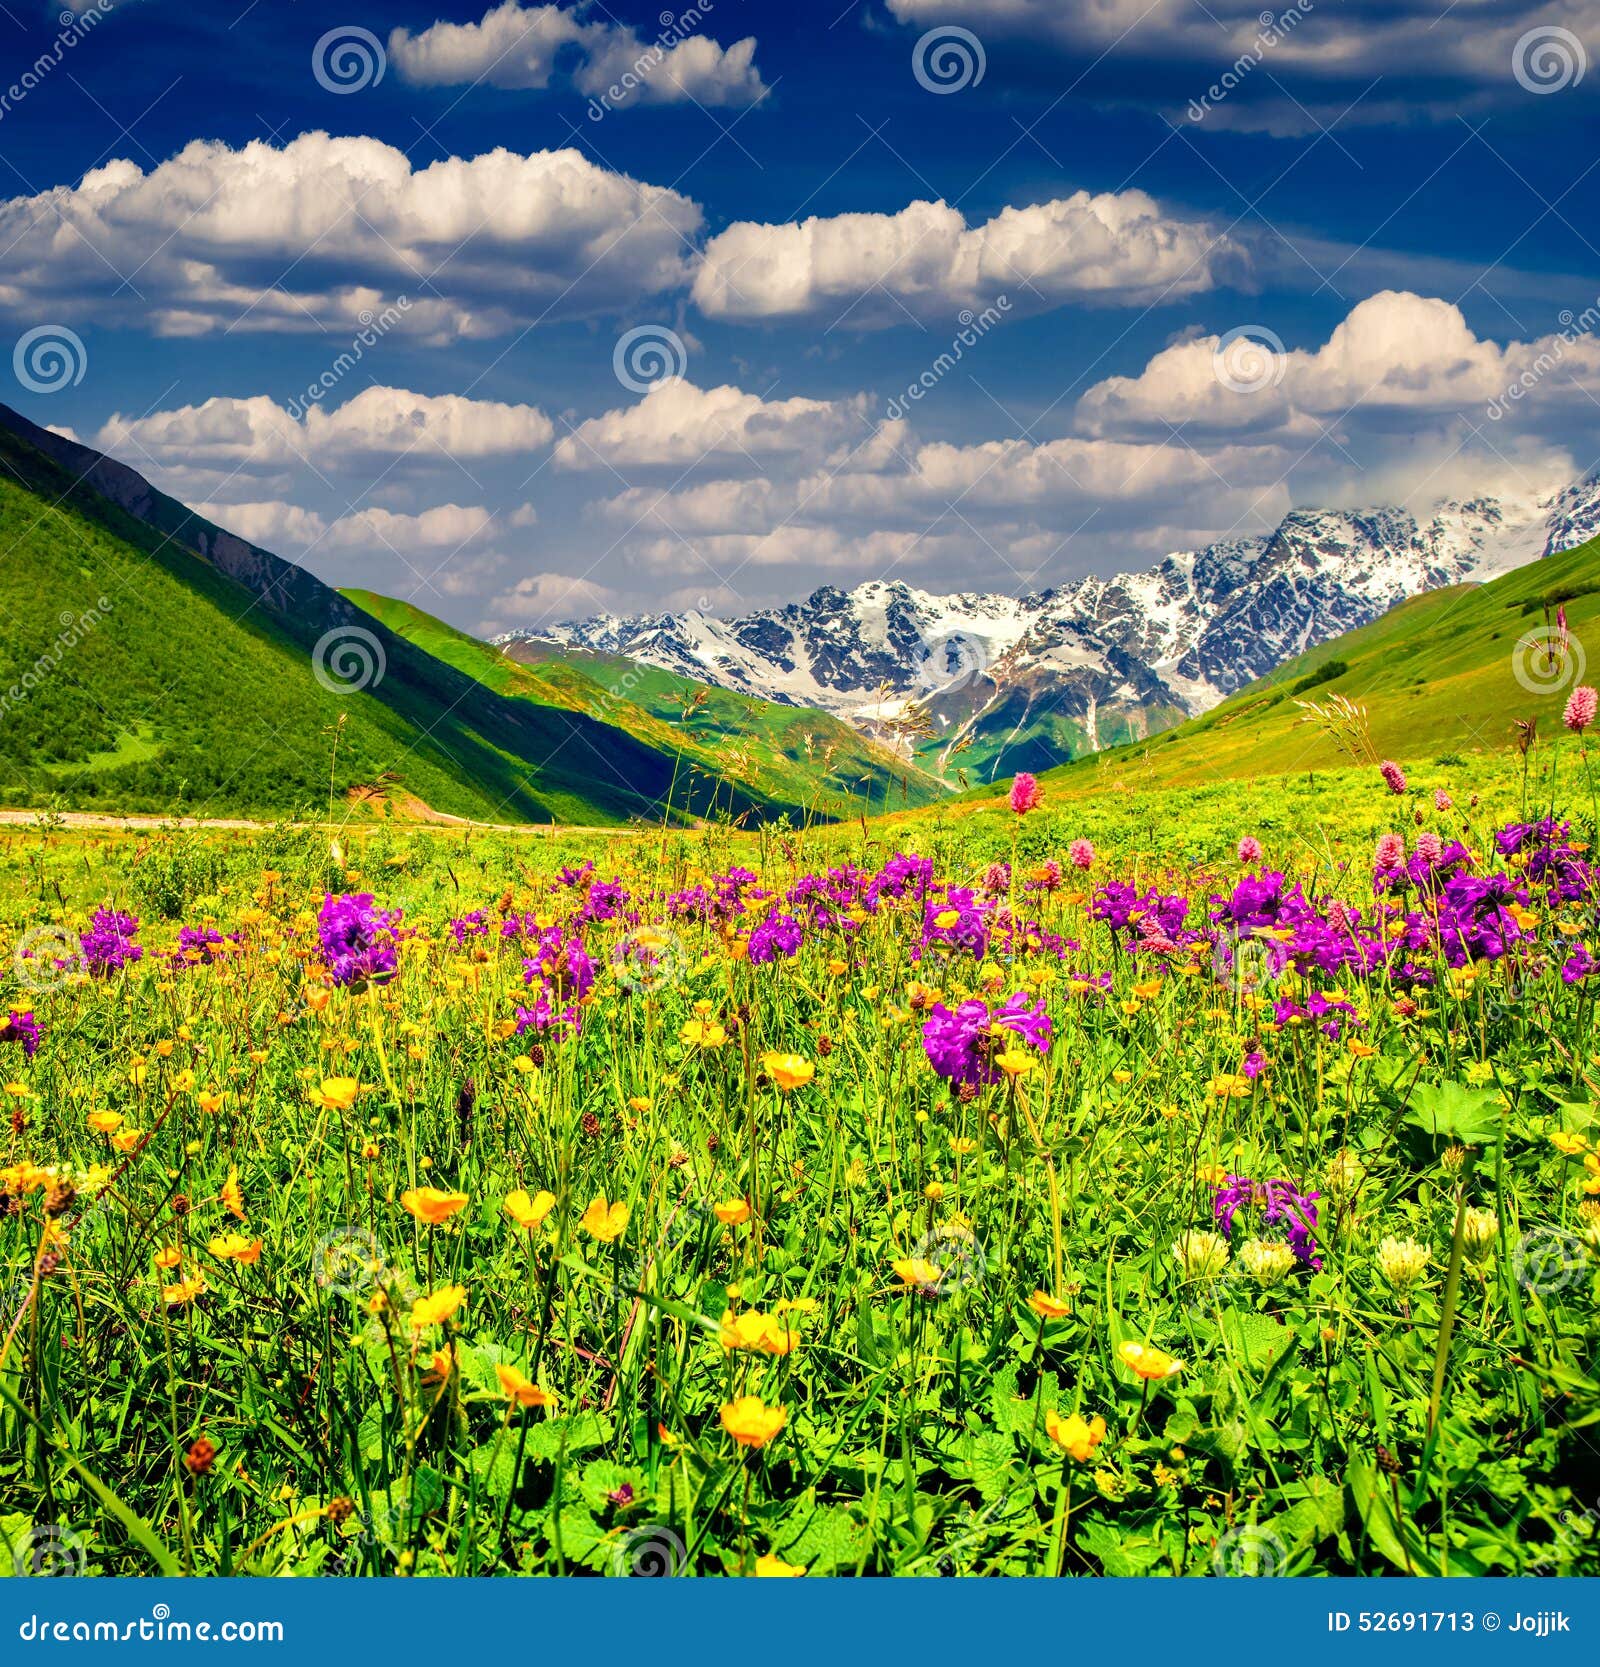 beautiful view of alpine meadows in mountains.